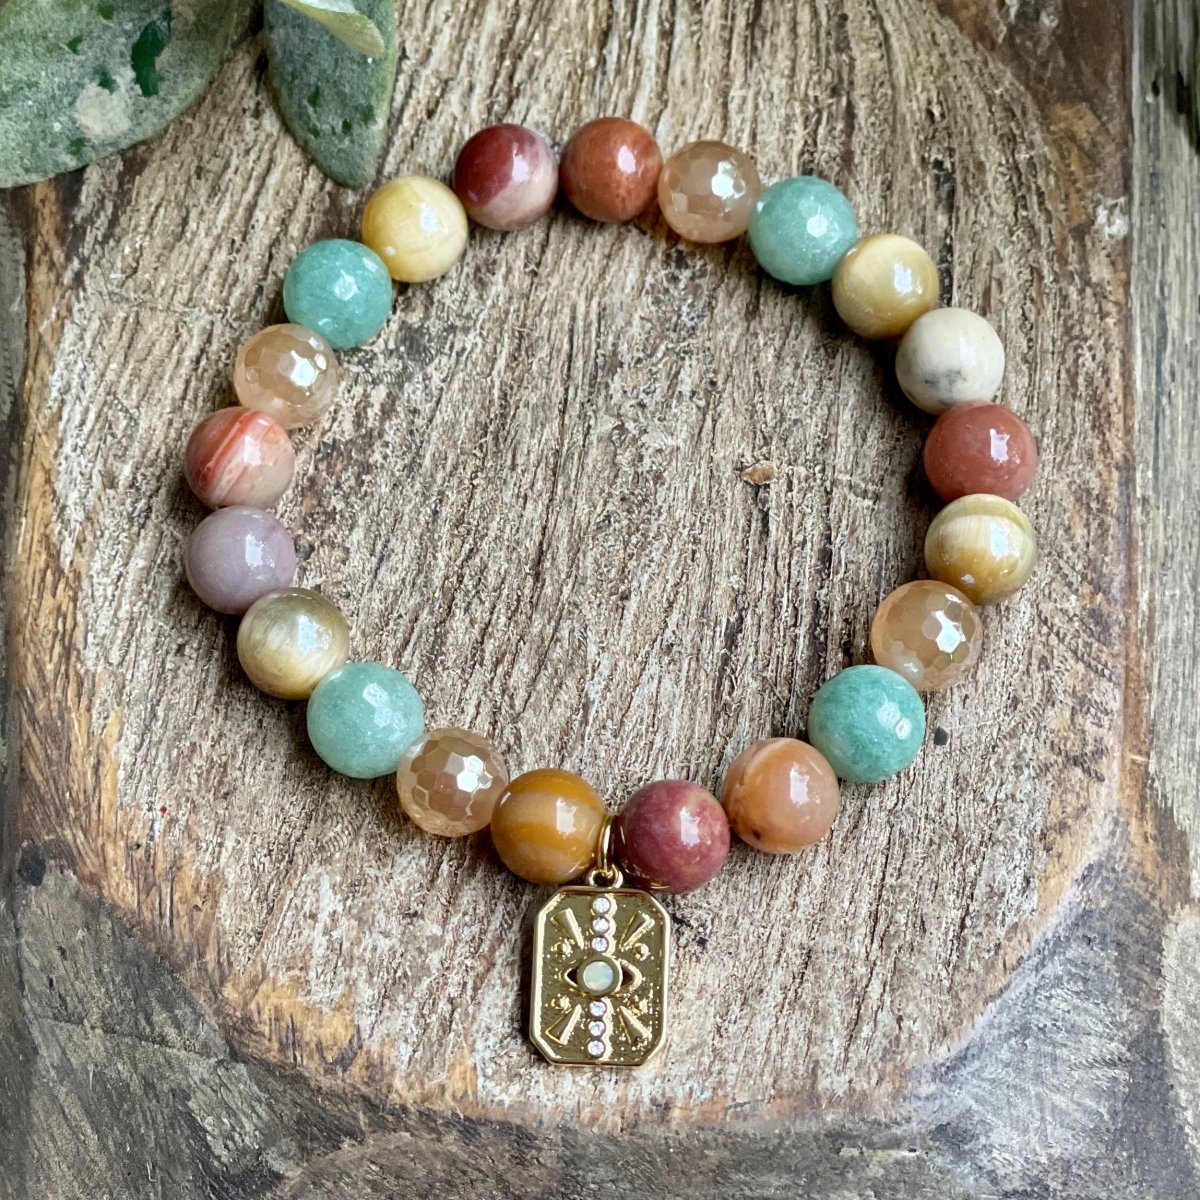 gemstones for confidence + courage